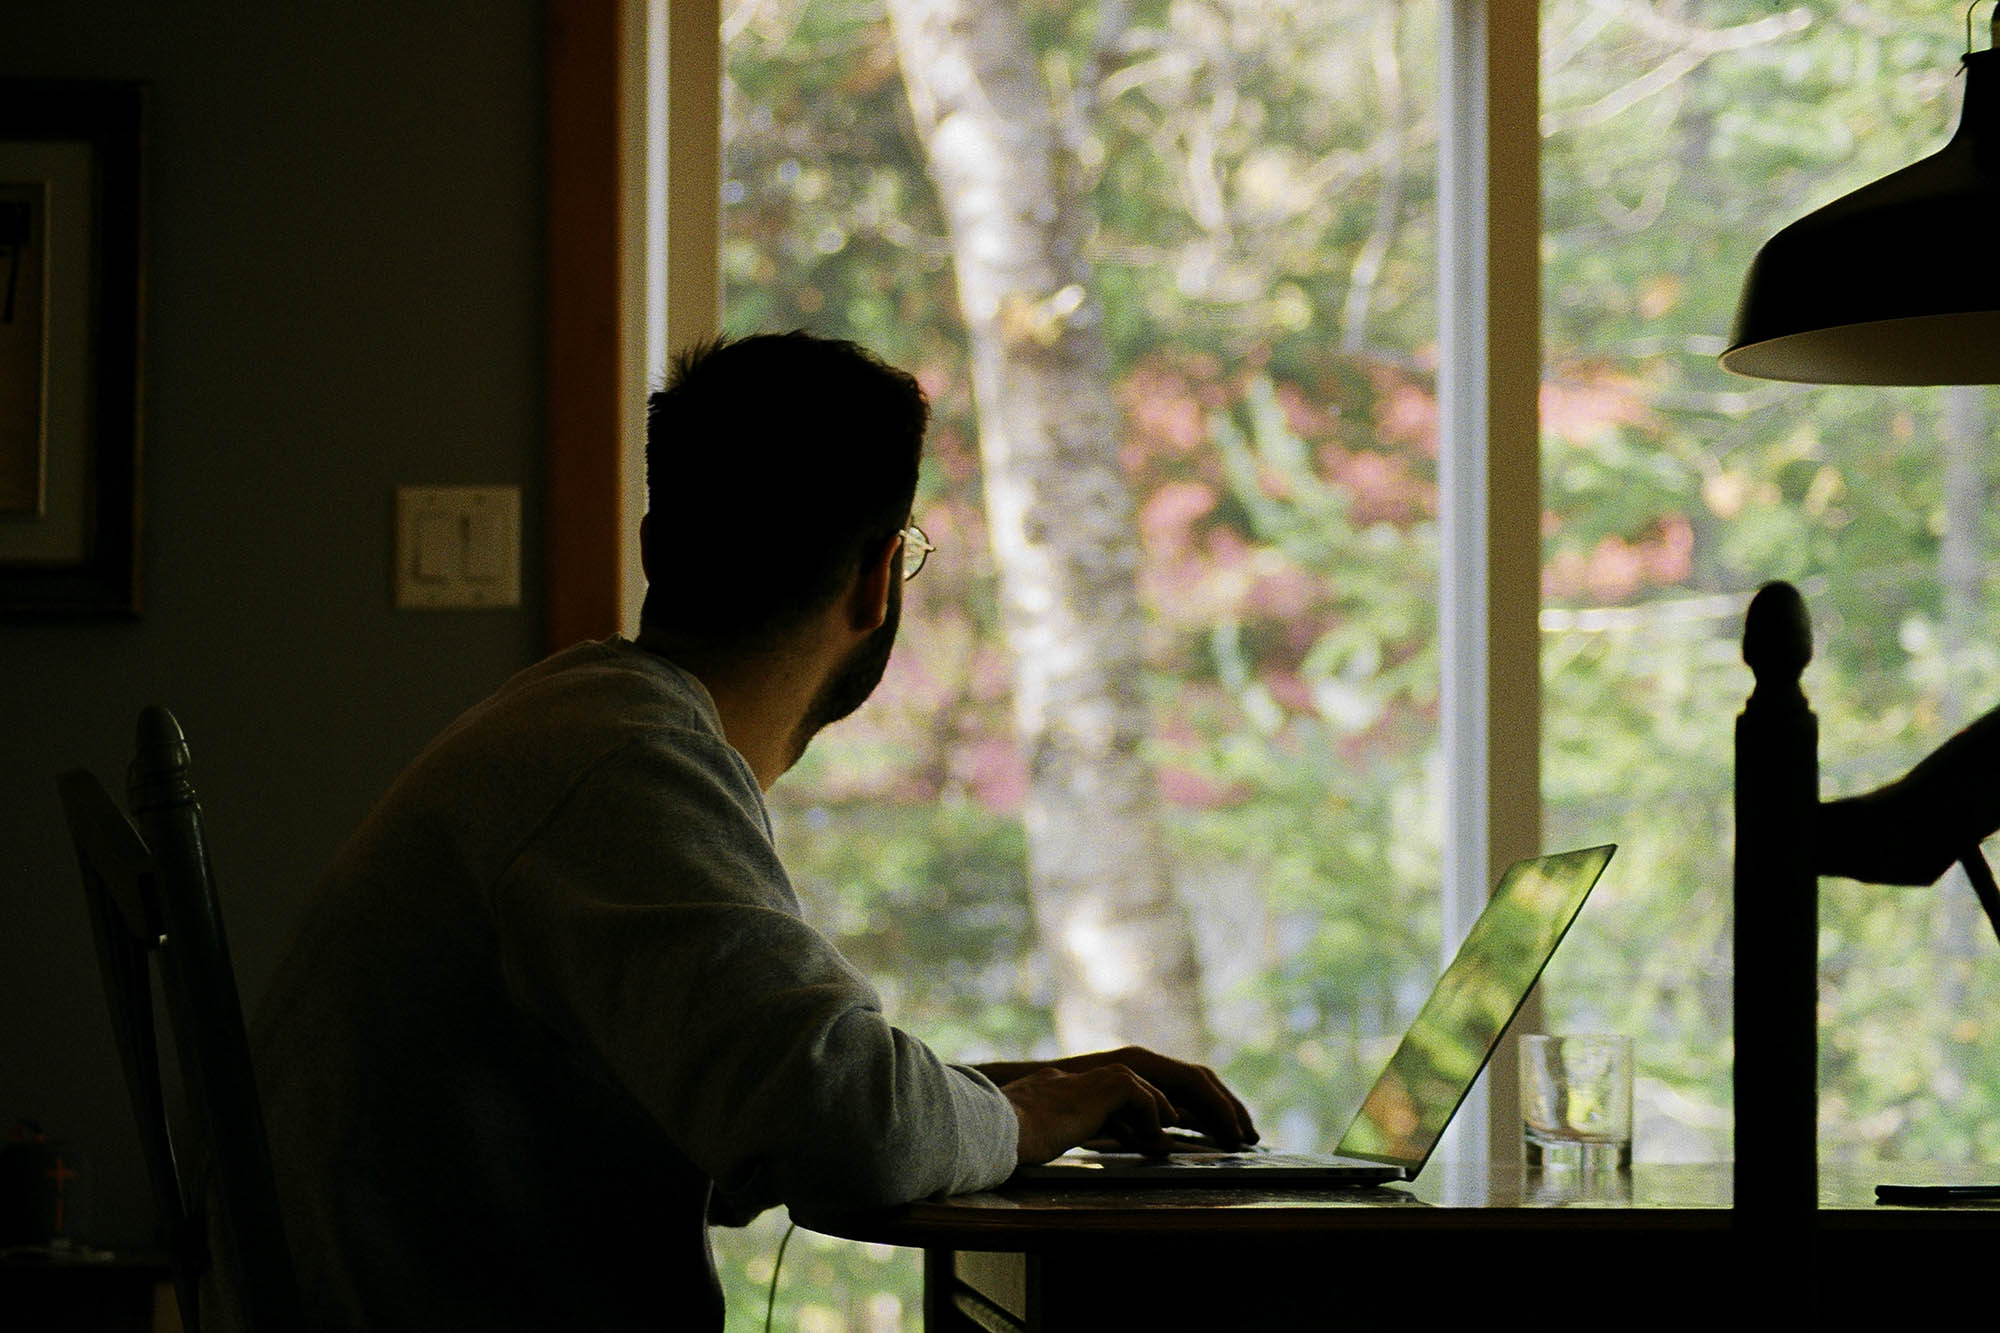 Man sitting at a table with laptop looking out their window